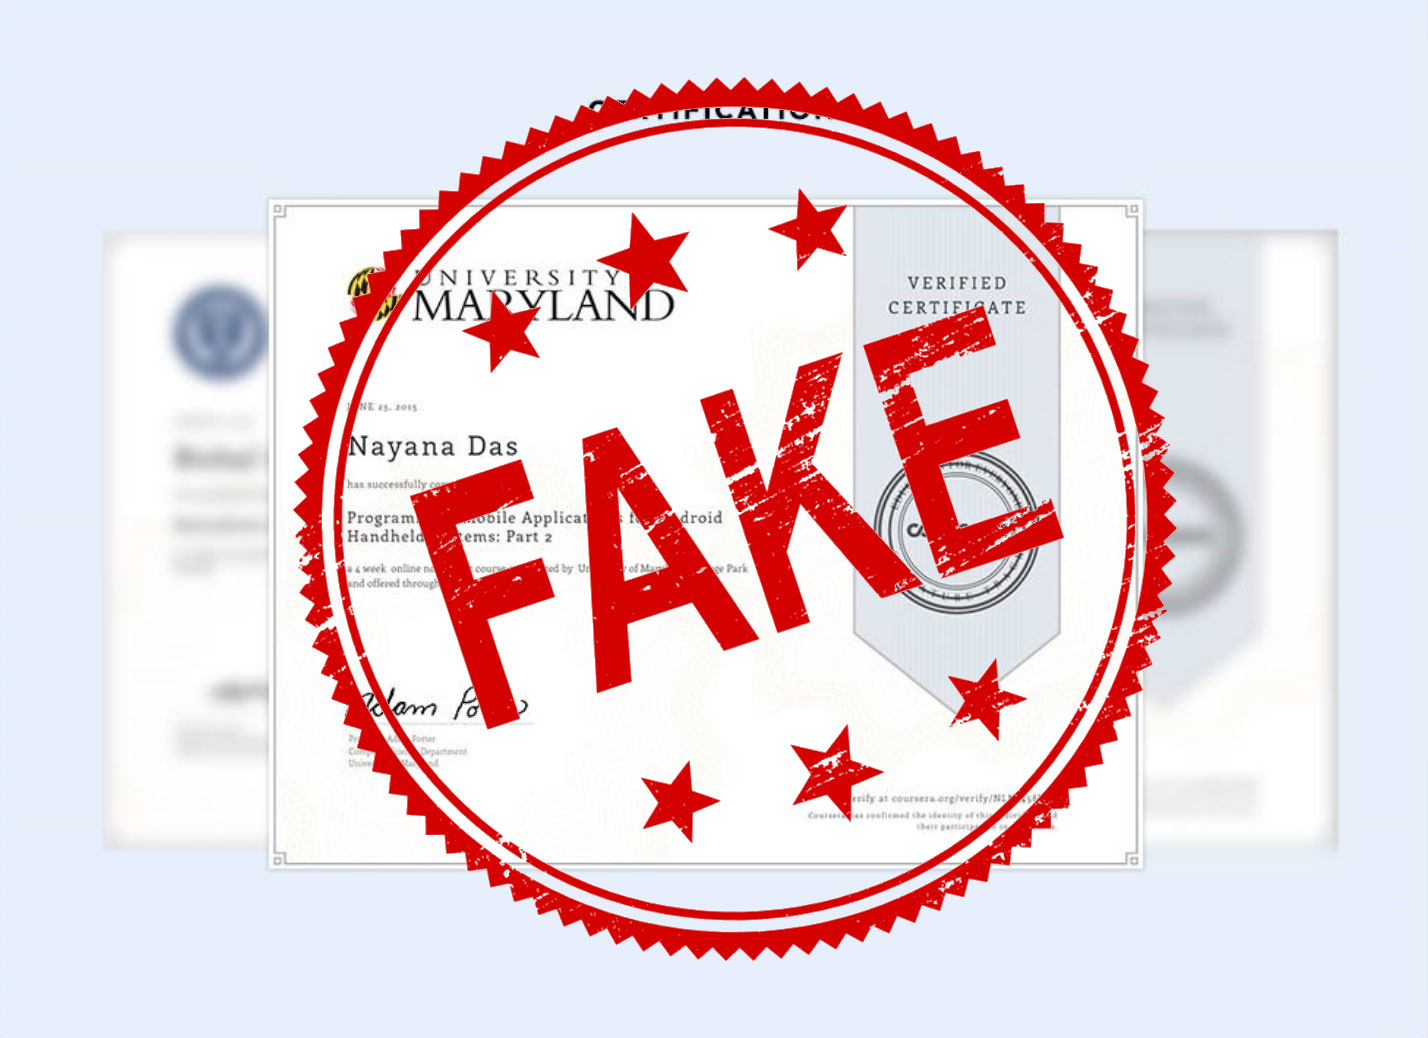 The world of fake coursera certificates